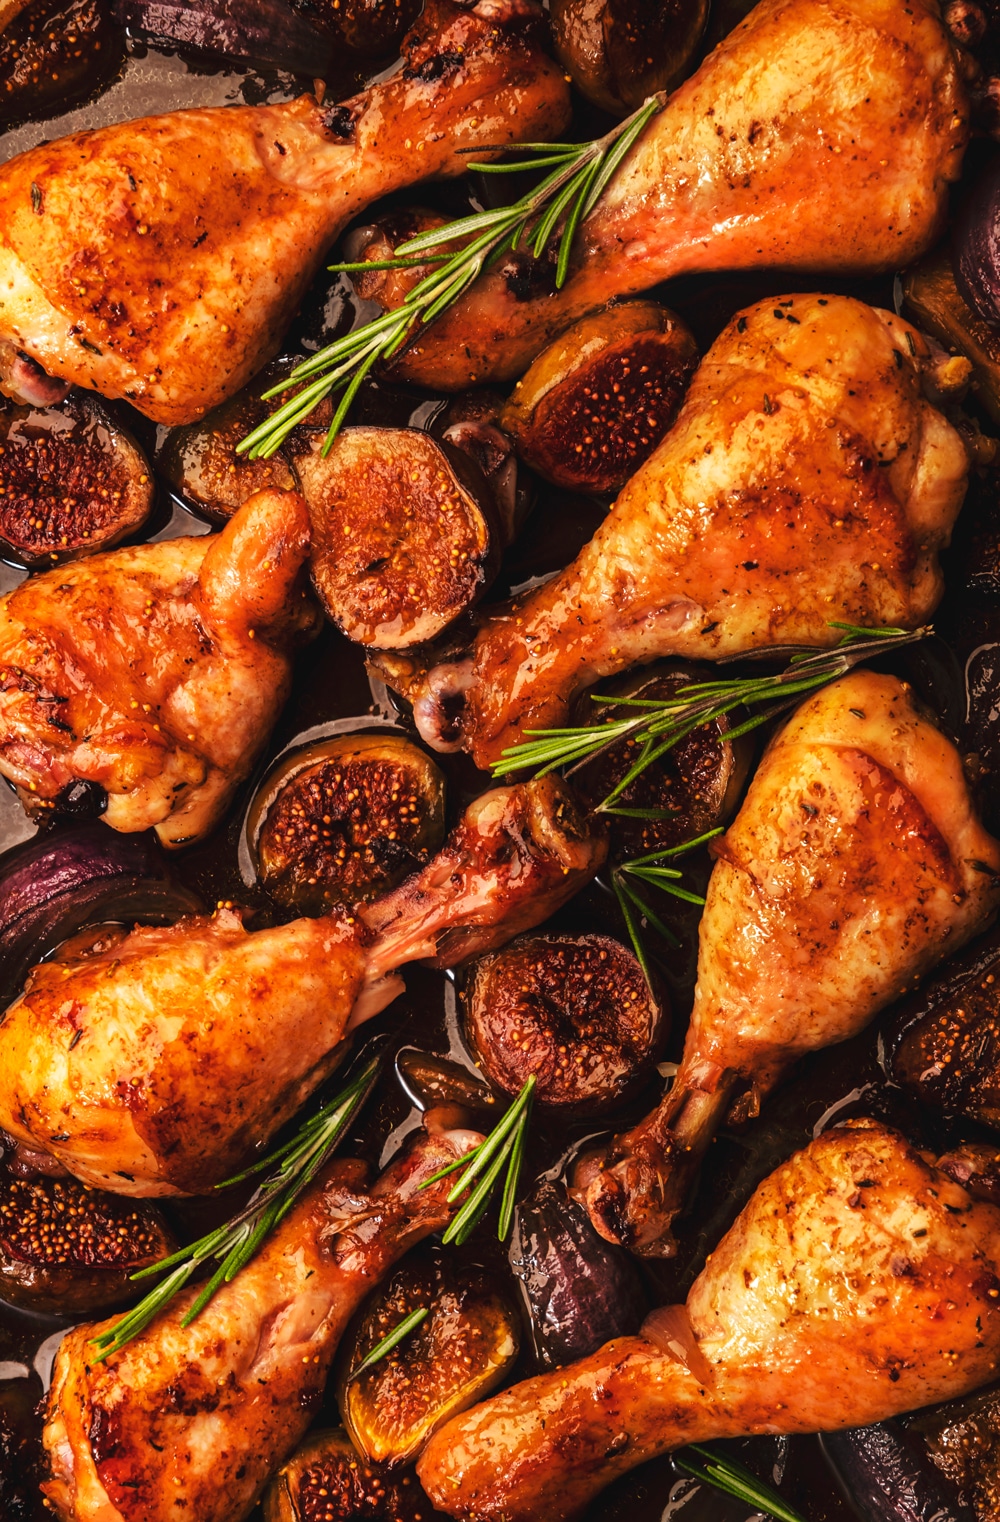 Berbere spiced chicken and figs